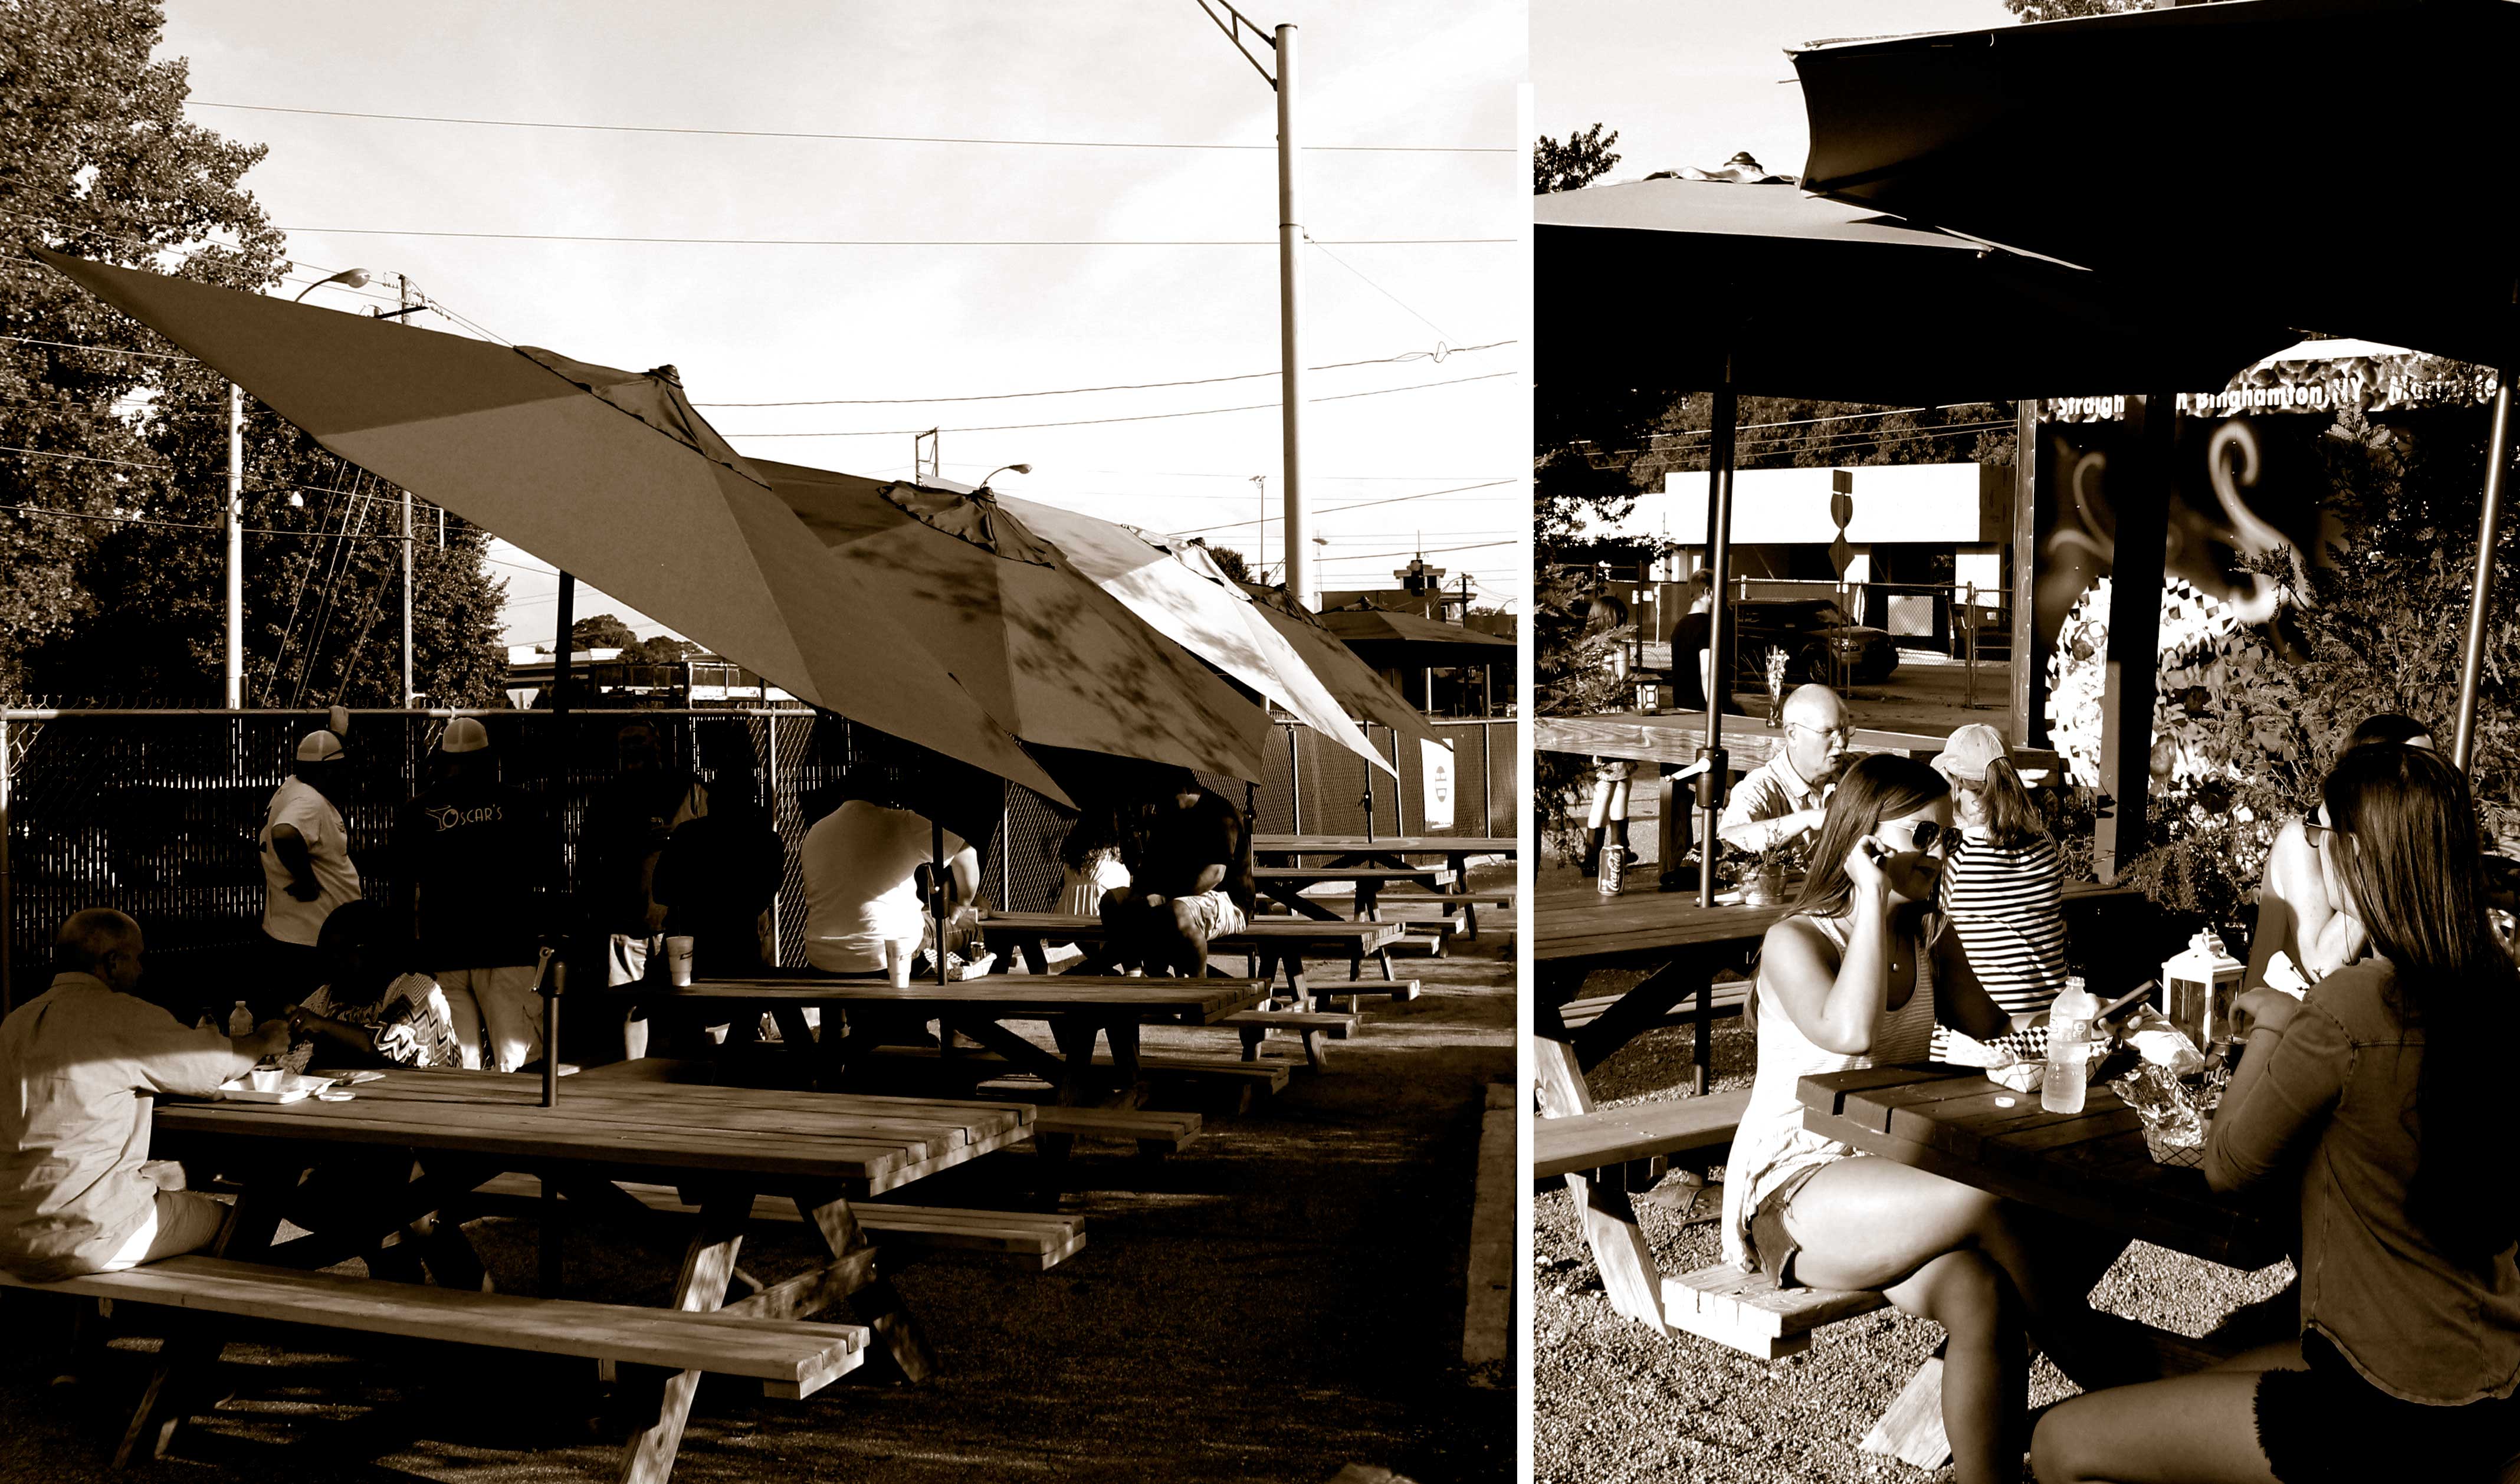 Collage of Atlanta Food Truck Park and Market patrons sitting and eating.